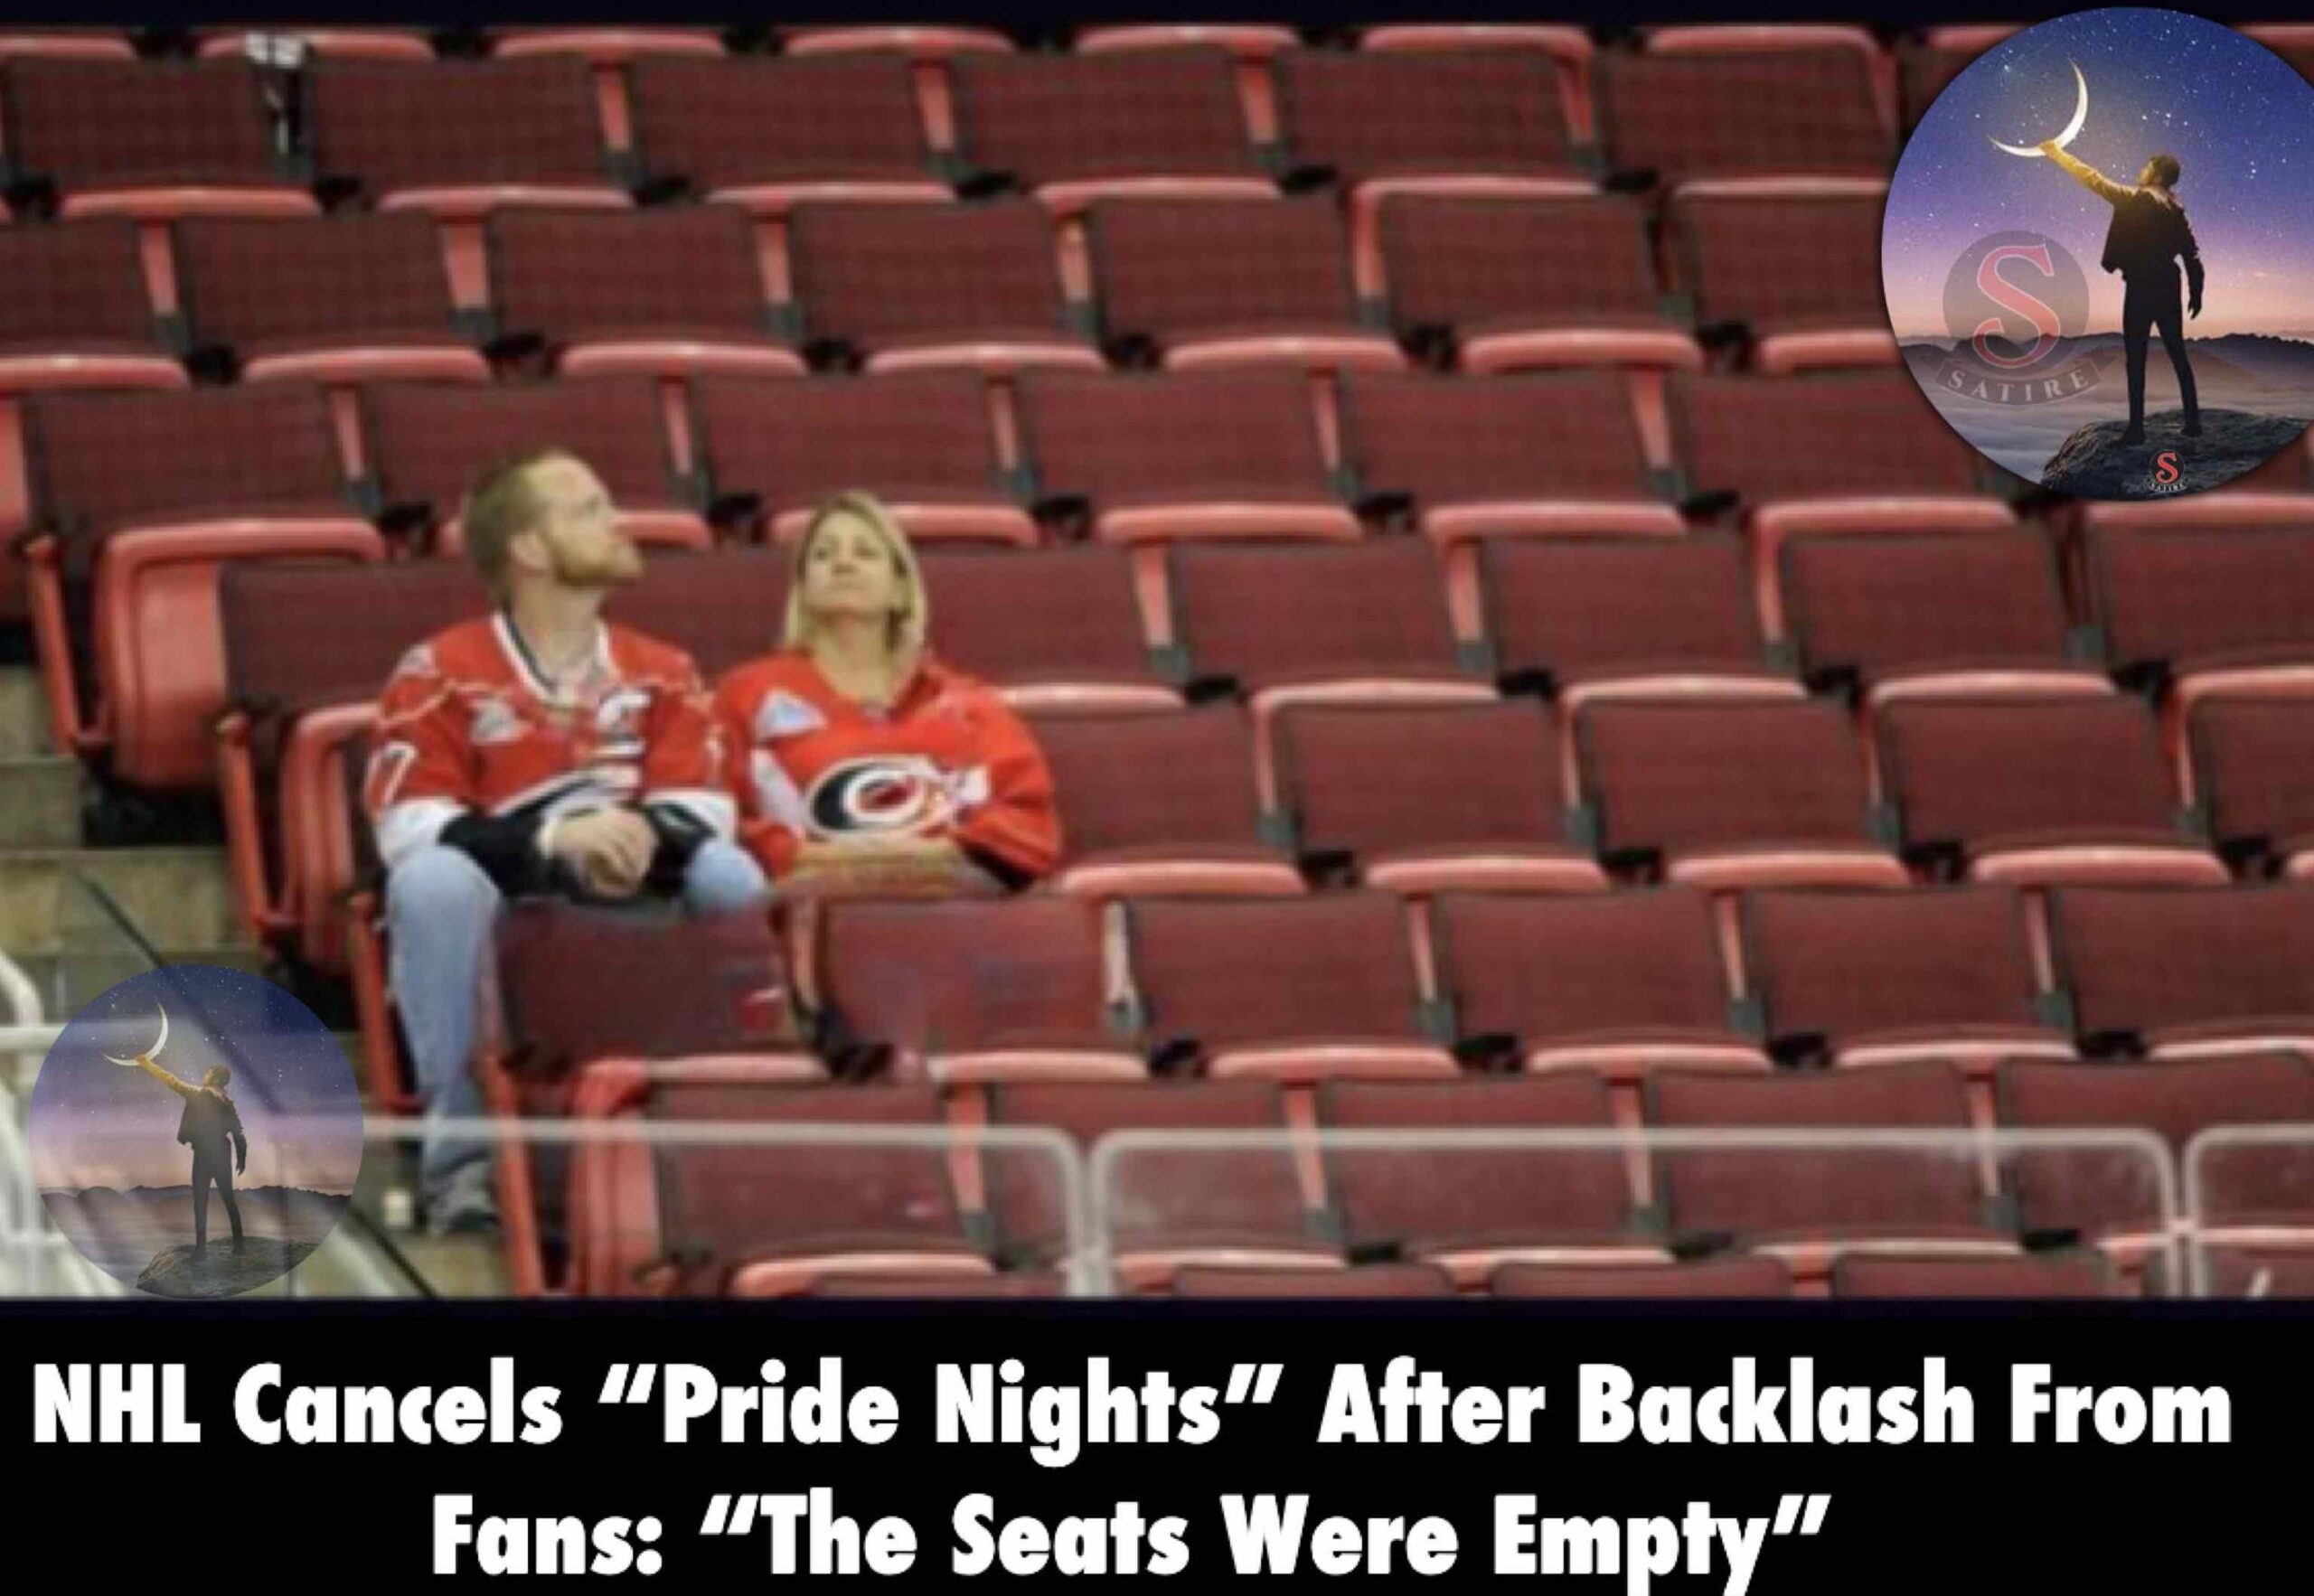 NHL Cancels “Pride Nights” After Backlash From Fans: “The Seats Were Empty”